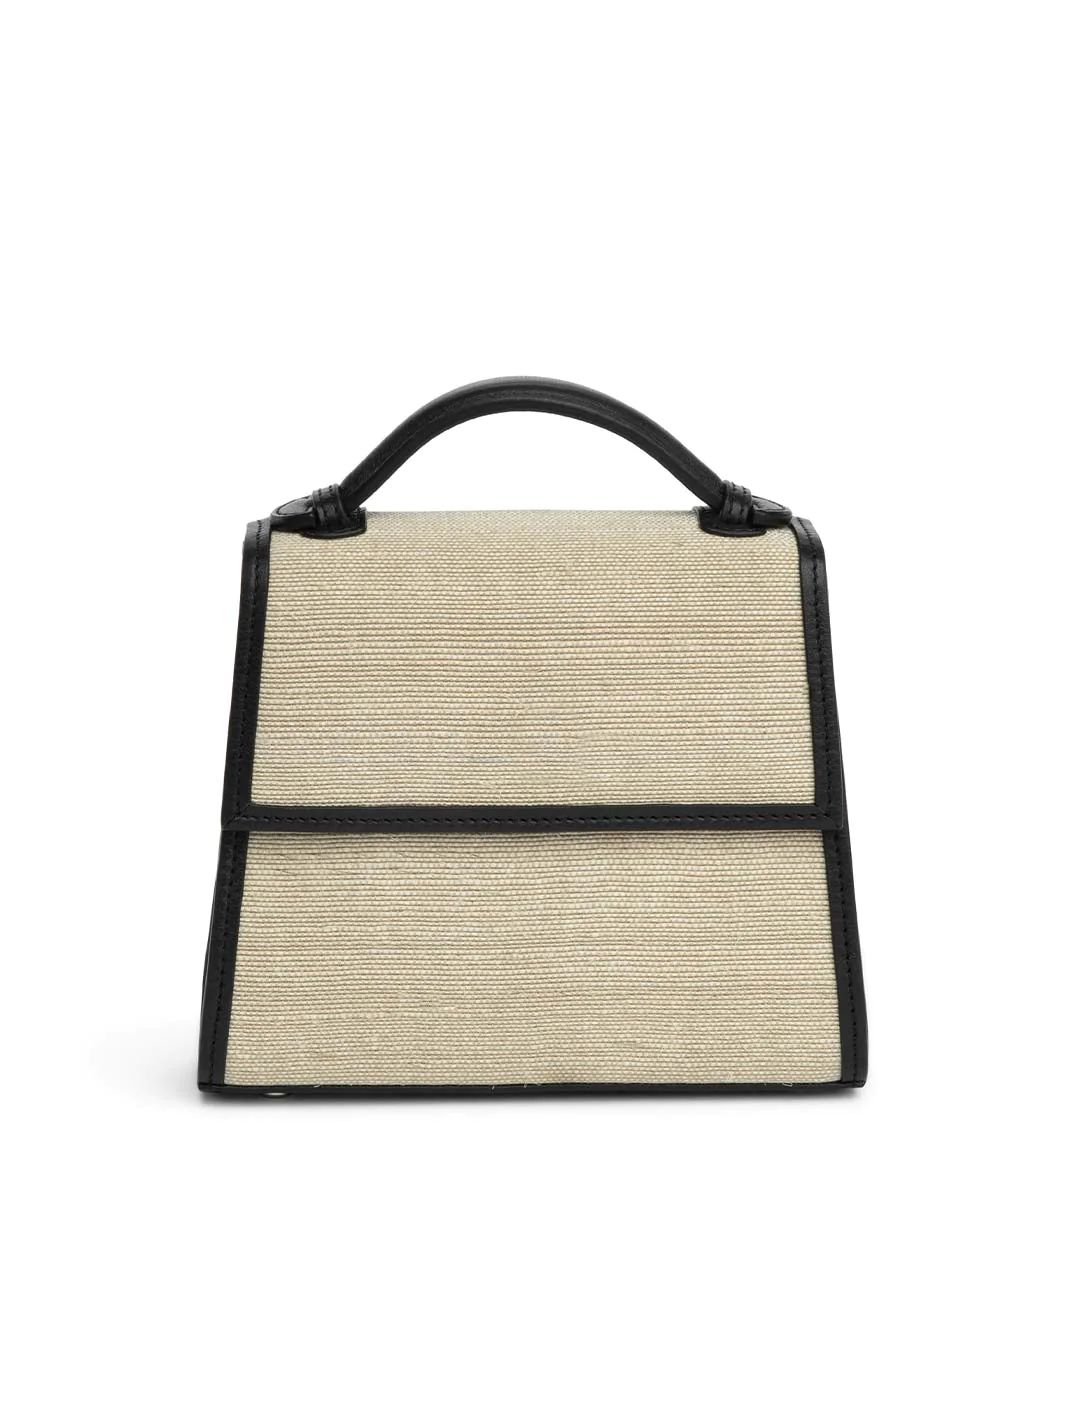 The Small Top Handle in Woven Fique | Over The Moon Gift